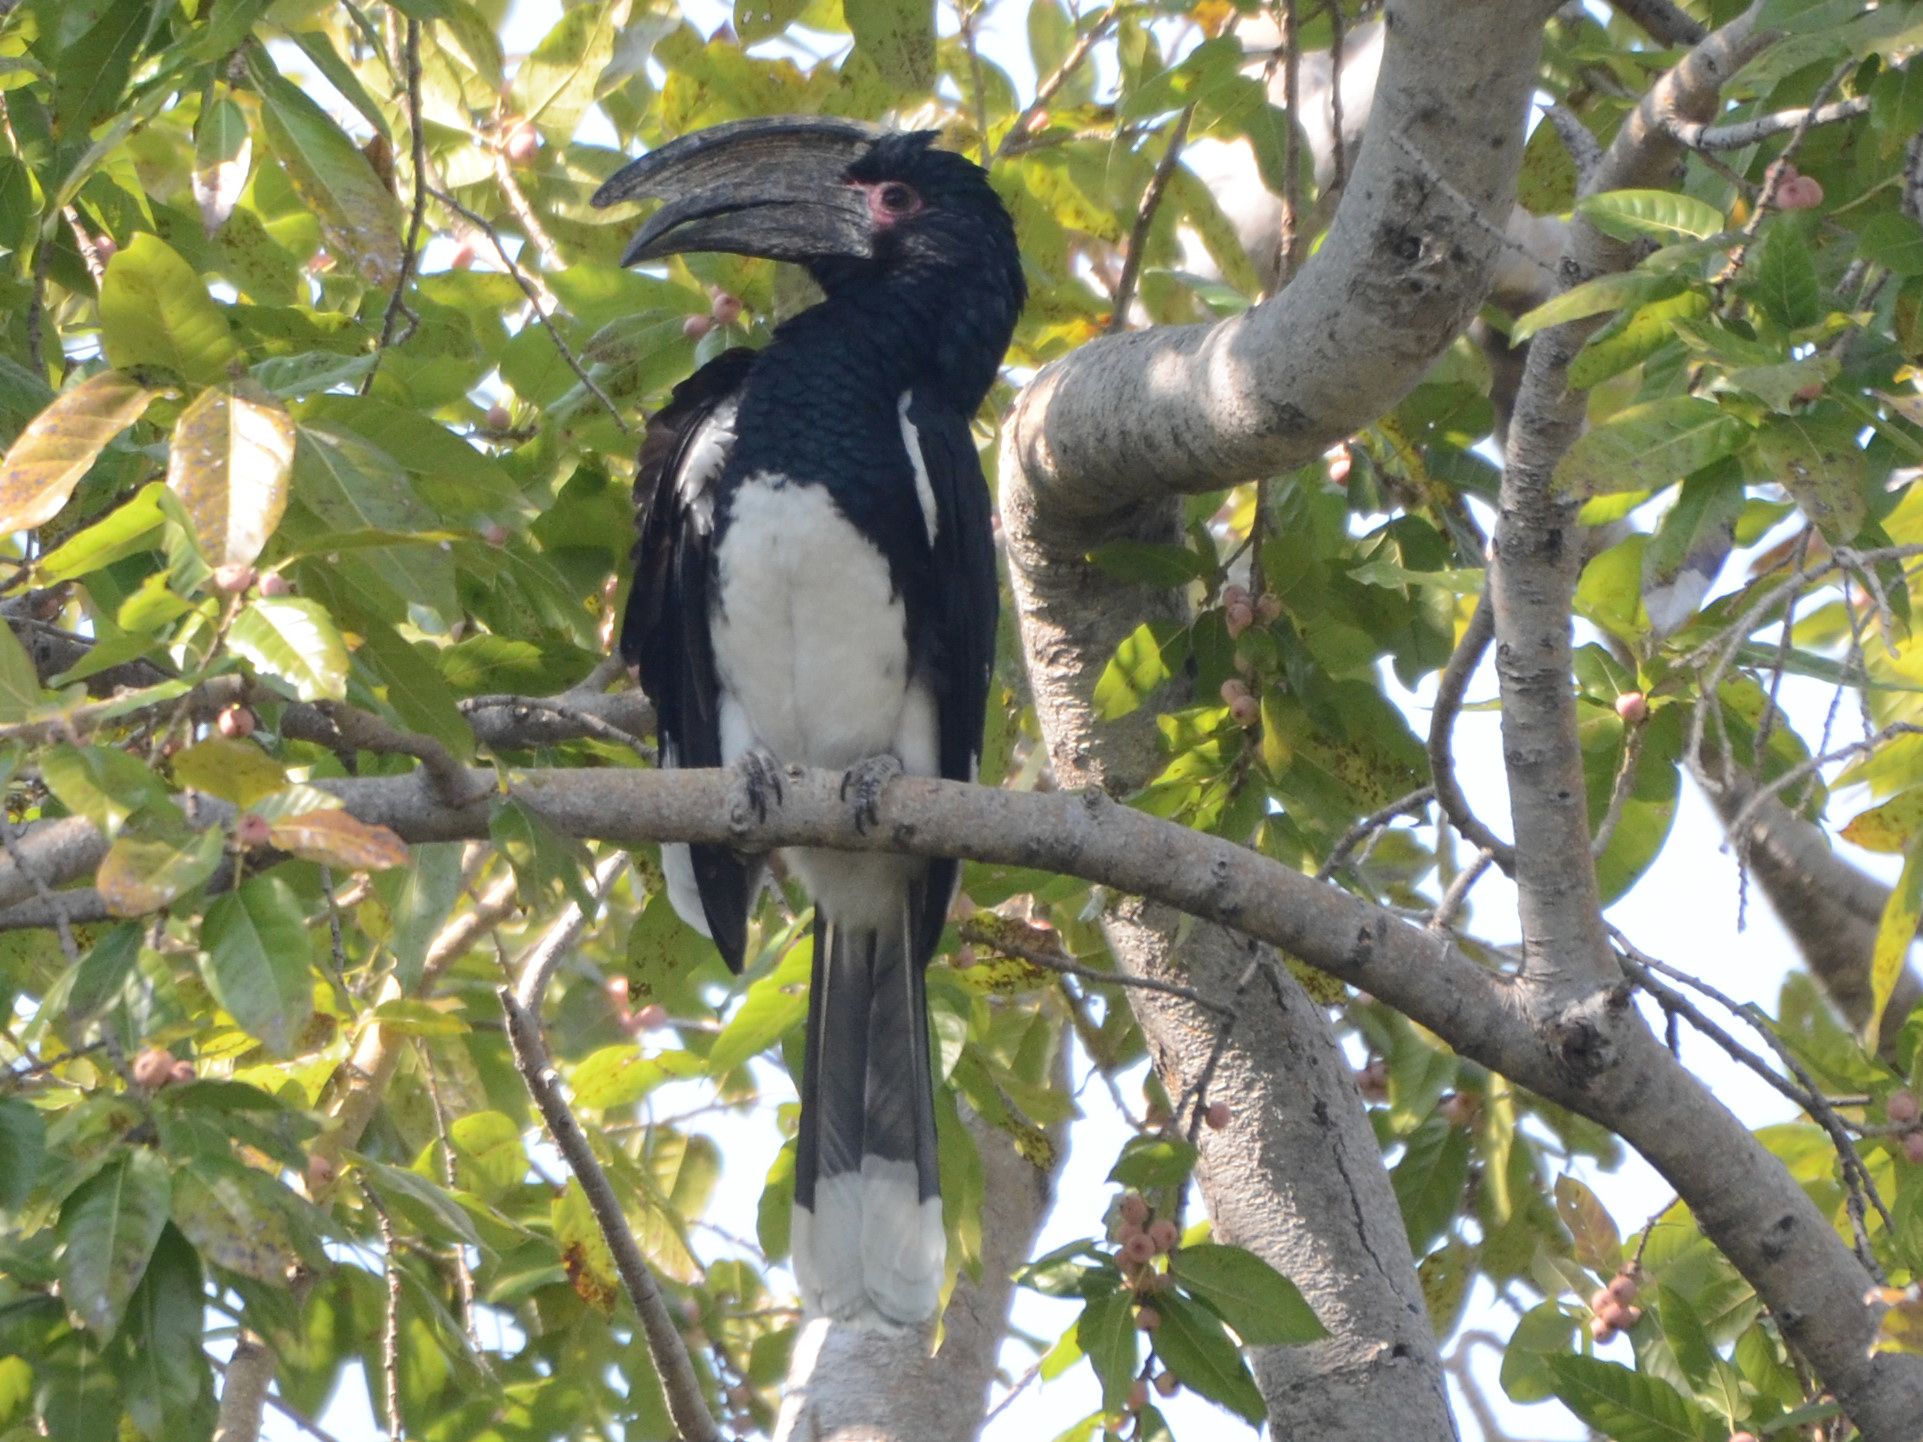 Click picture to see more Trumpeter Hornbills.